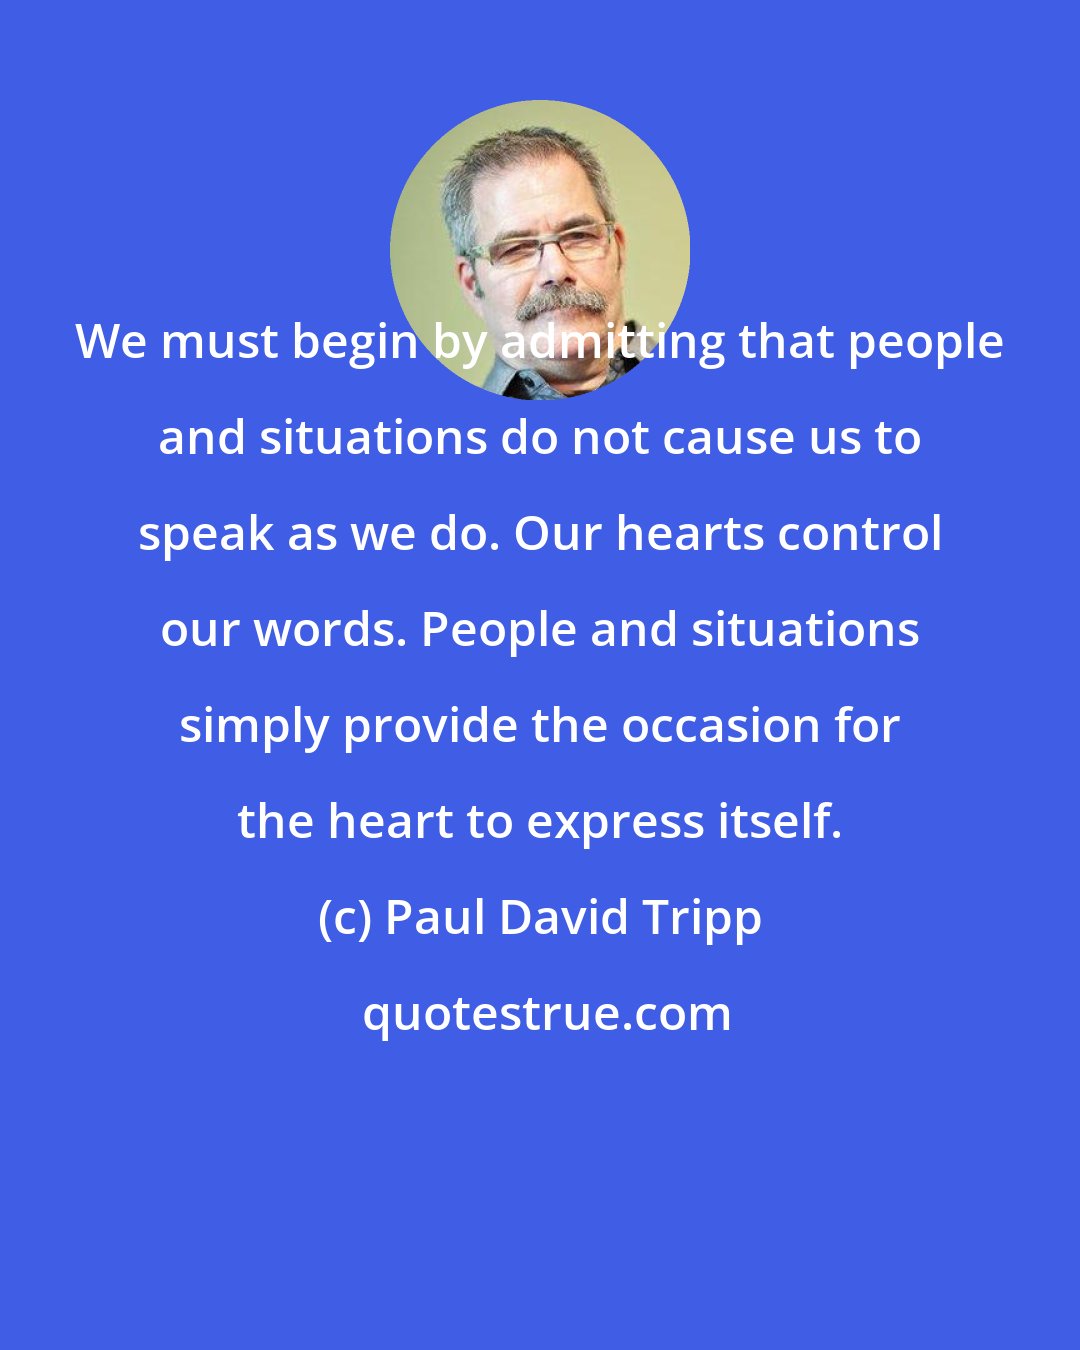 Paul David Tripp: We must begin by admitting that people and situations do not cause us to speak as we do. Our hearts control our words. People and situations simply provide the occasion for the heart to express itself.